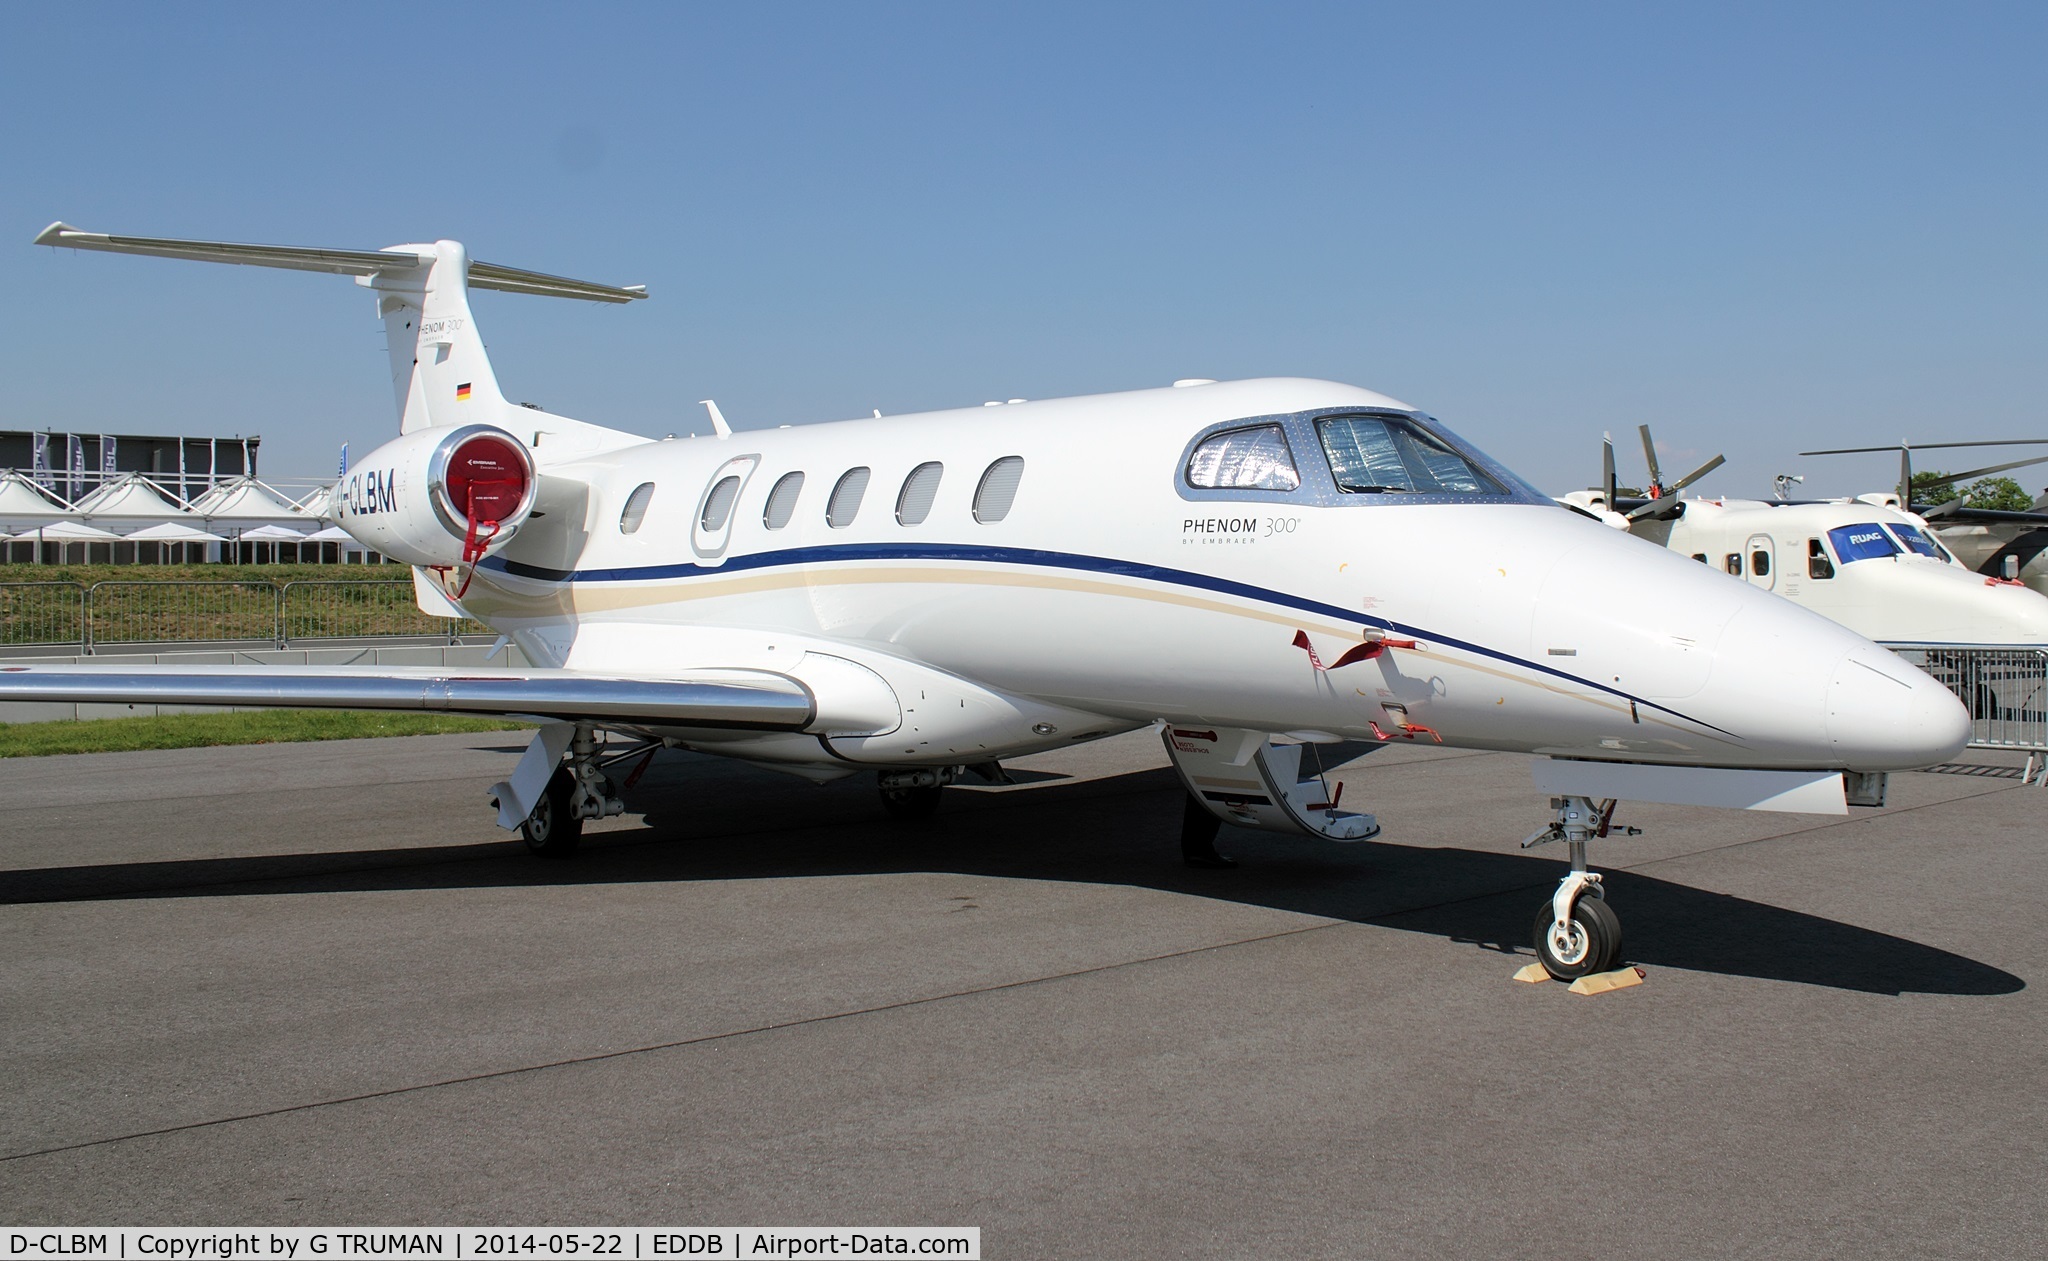 D-CLBM, 2013 Embraer EMB-505 Phenom 300 C/N 50500173, In the static at ILA 2014